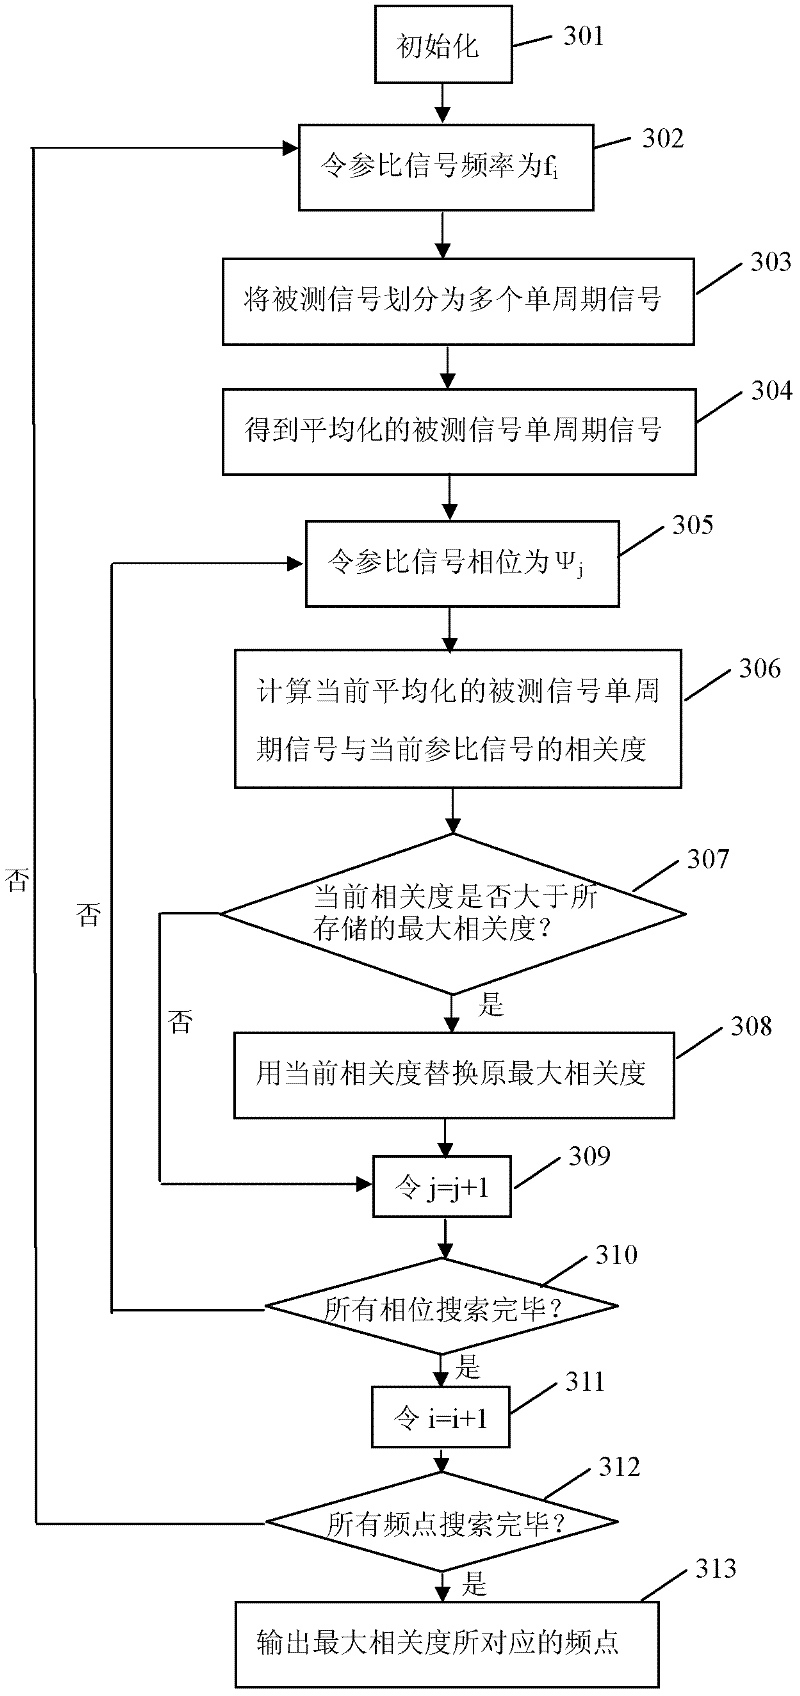 Anti-noise wide-range frequency measurement method and phase locking frequency meter